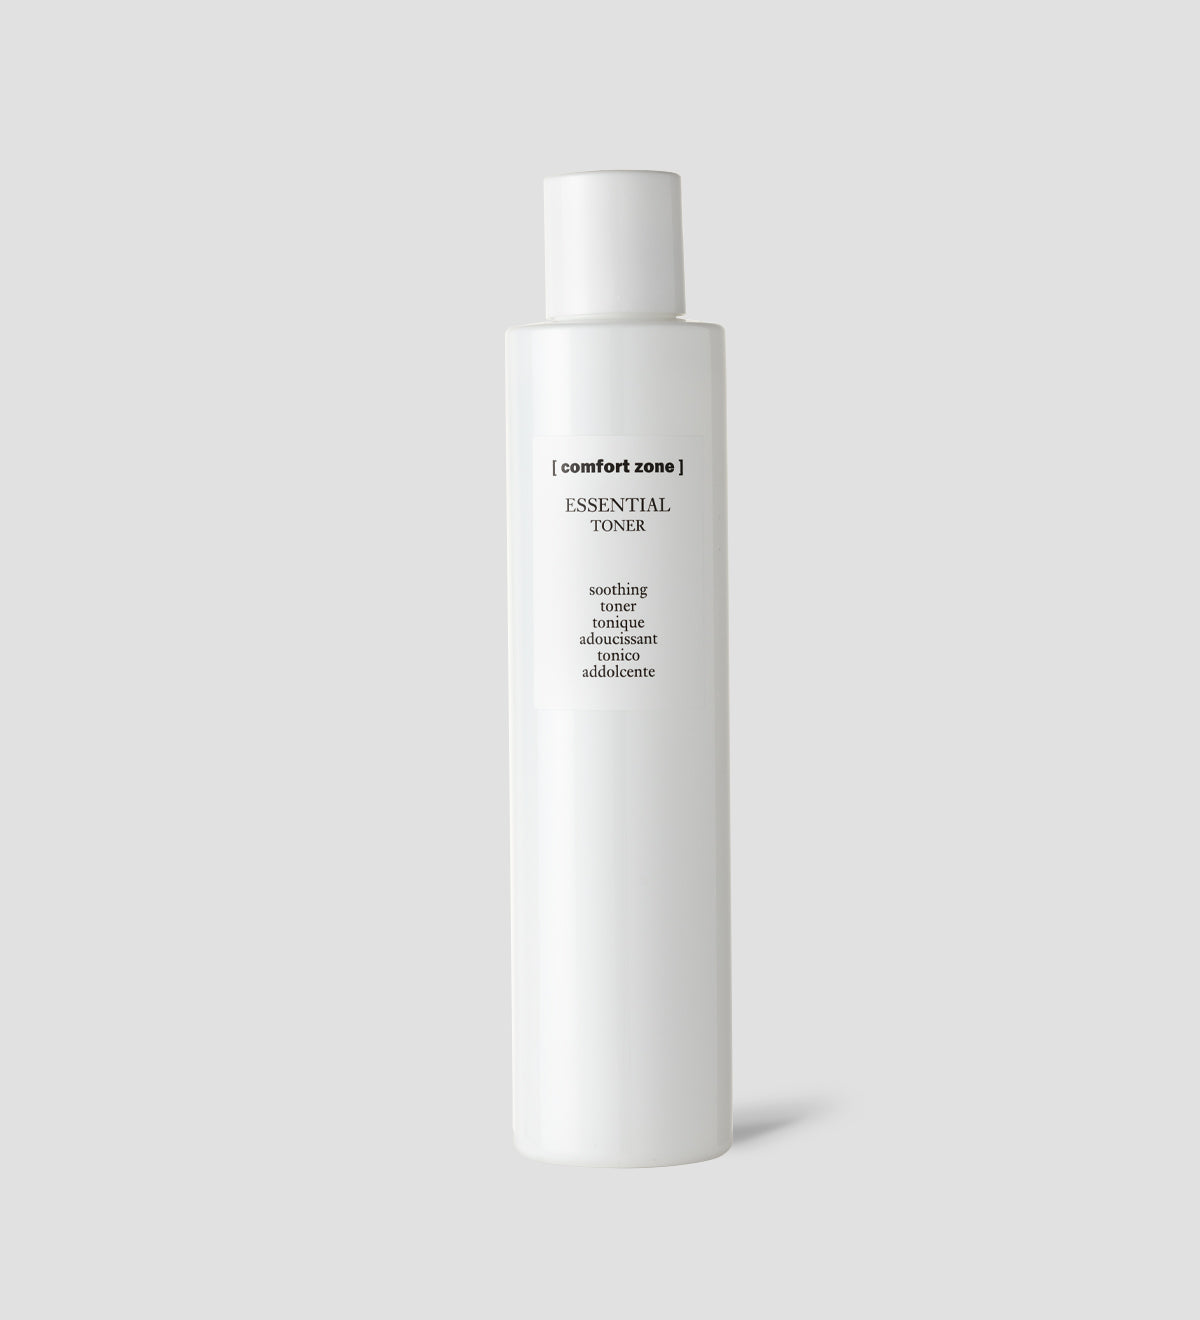 Comfort Zone: ESSENTIAL FACE WASH Gentle foaming cleanser-